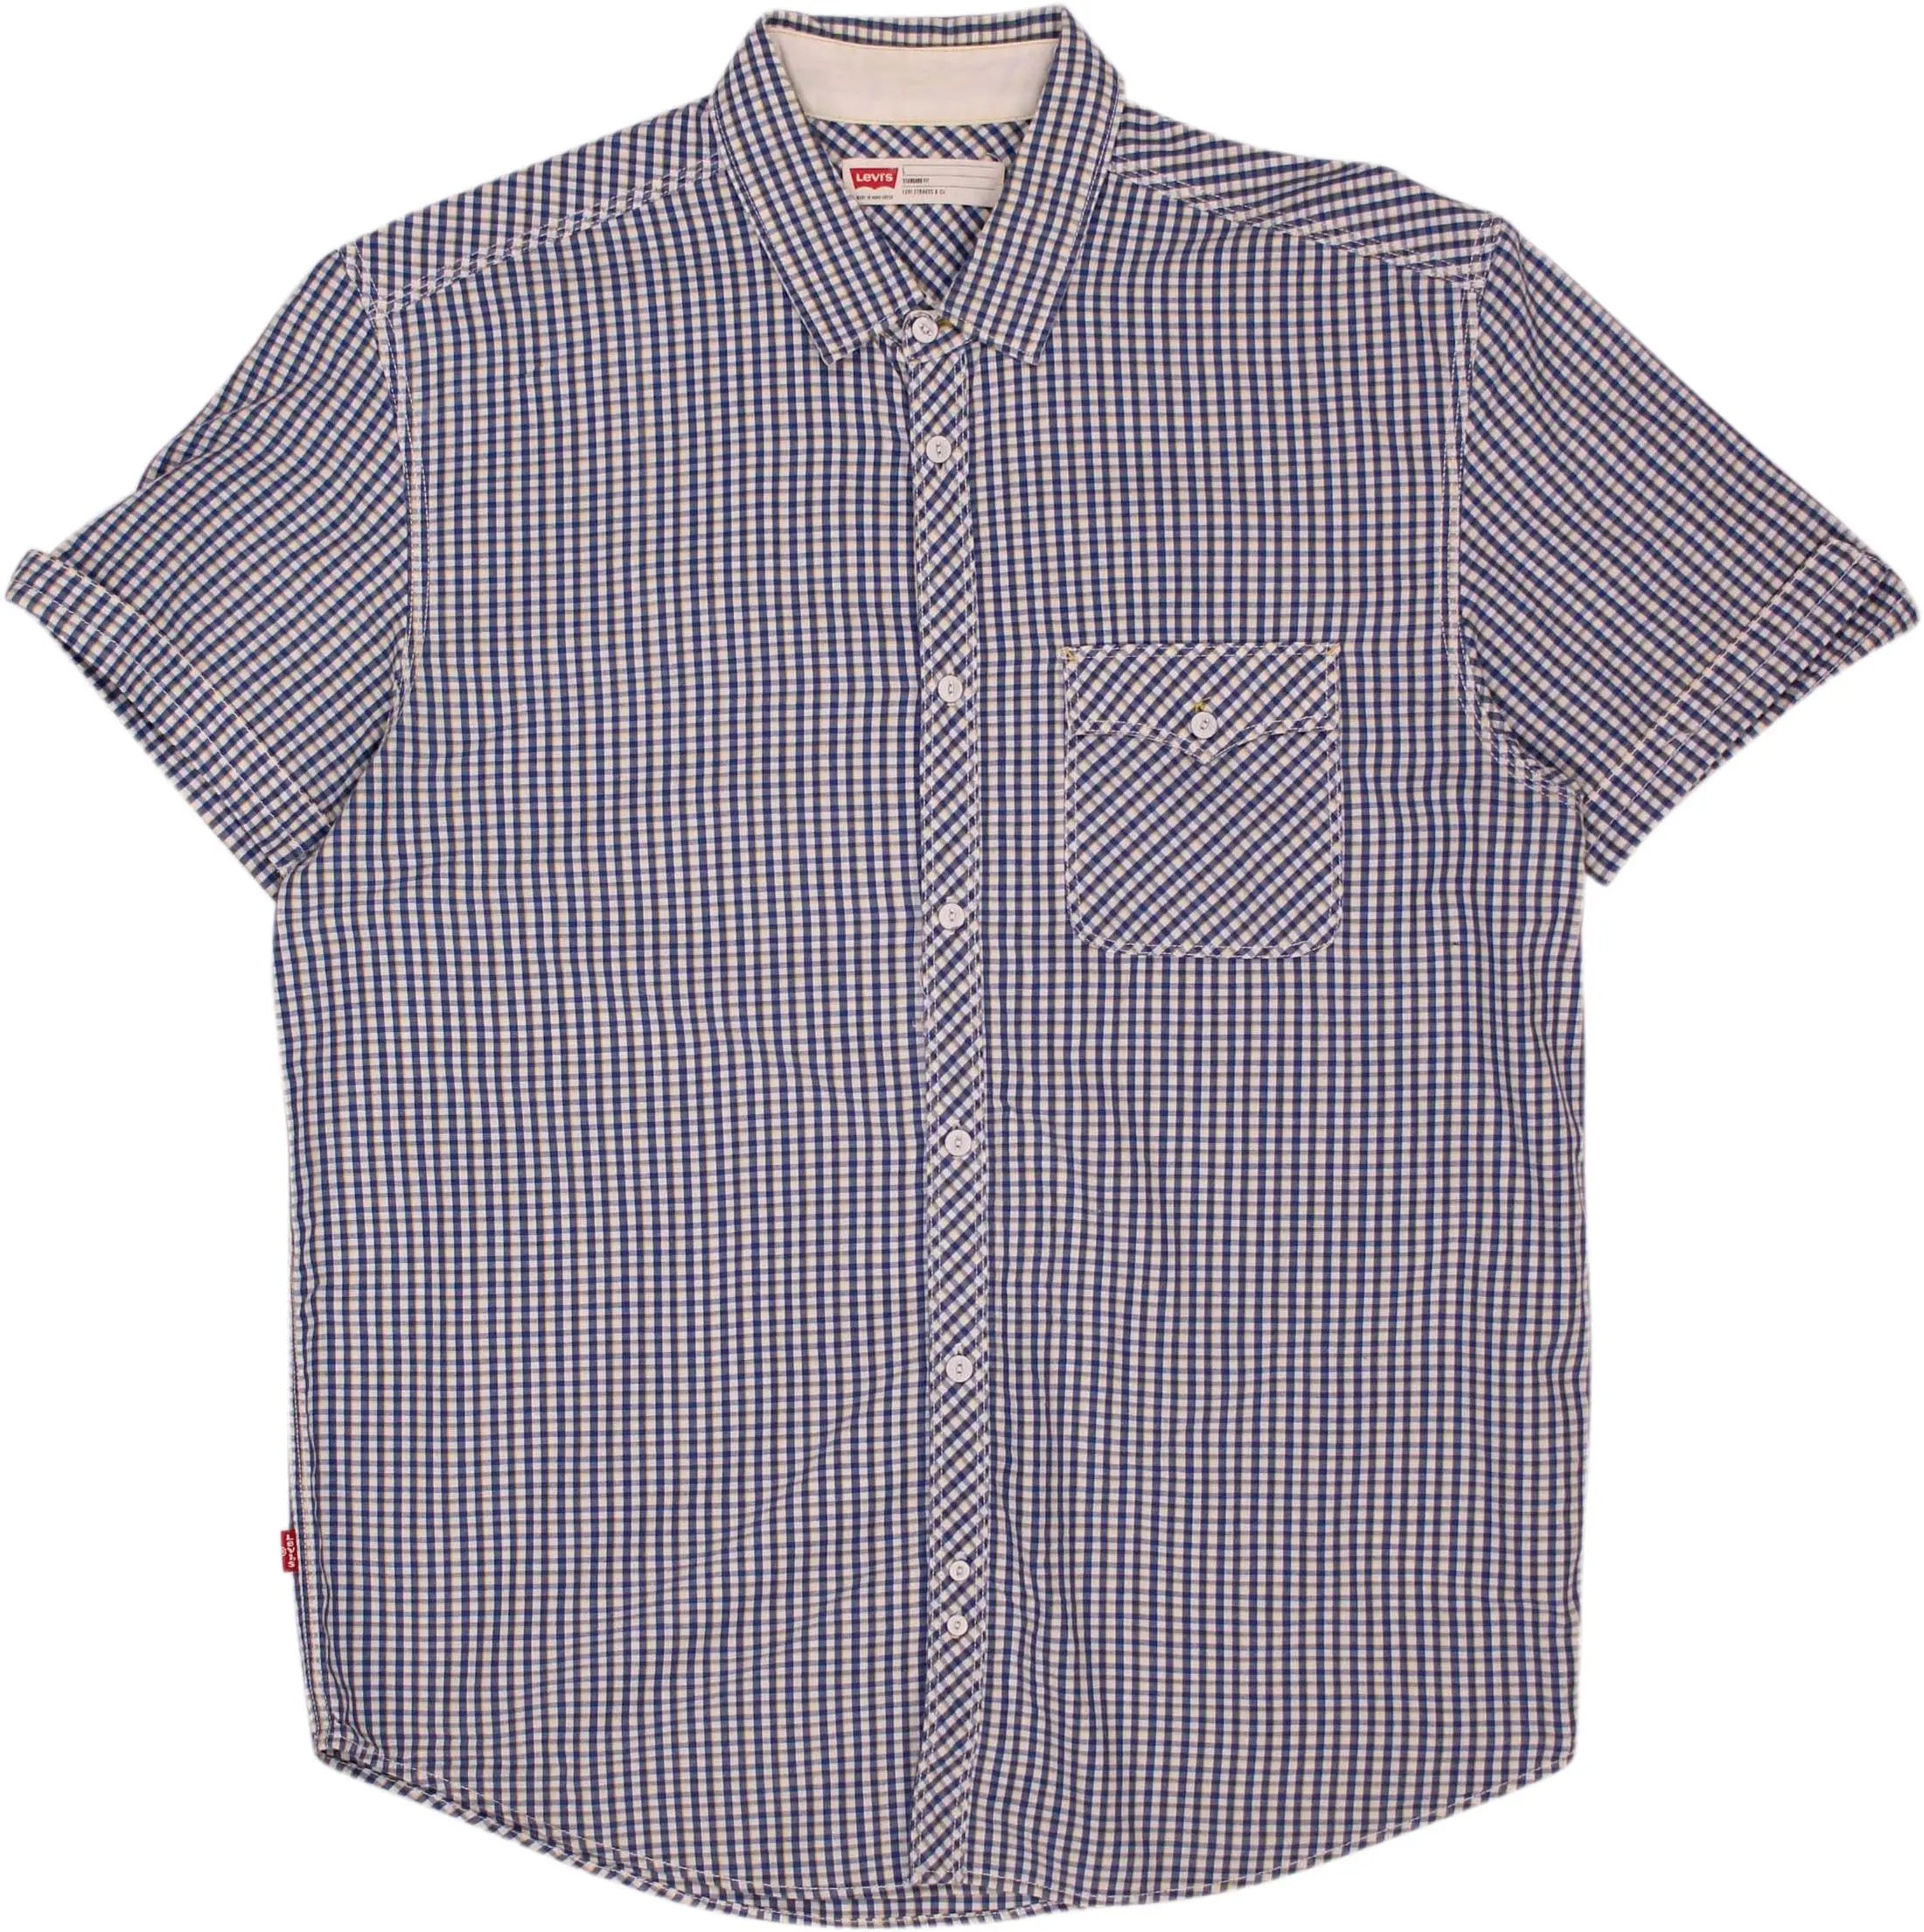 Levi's - Blue Checked Short Sleeve Shirt by Levi's- ThriftTale.com - Vintage and second handclothing